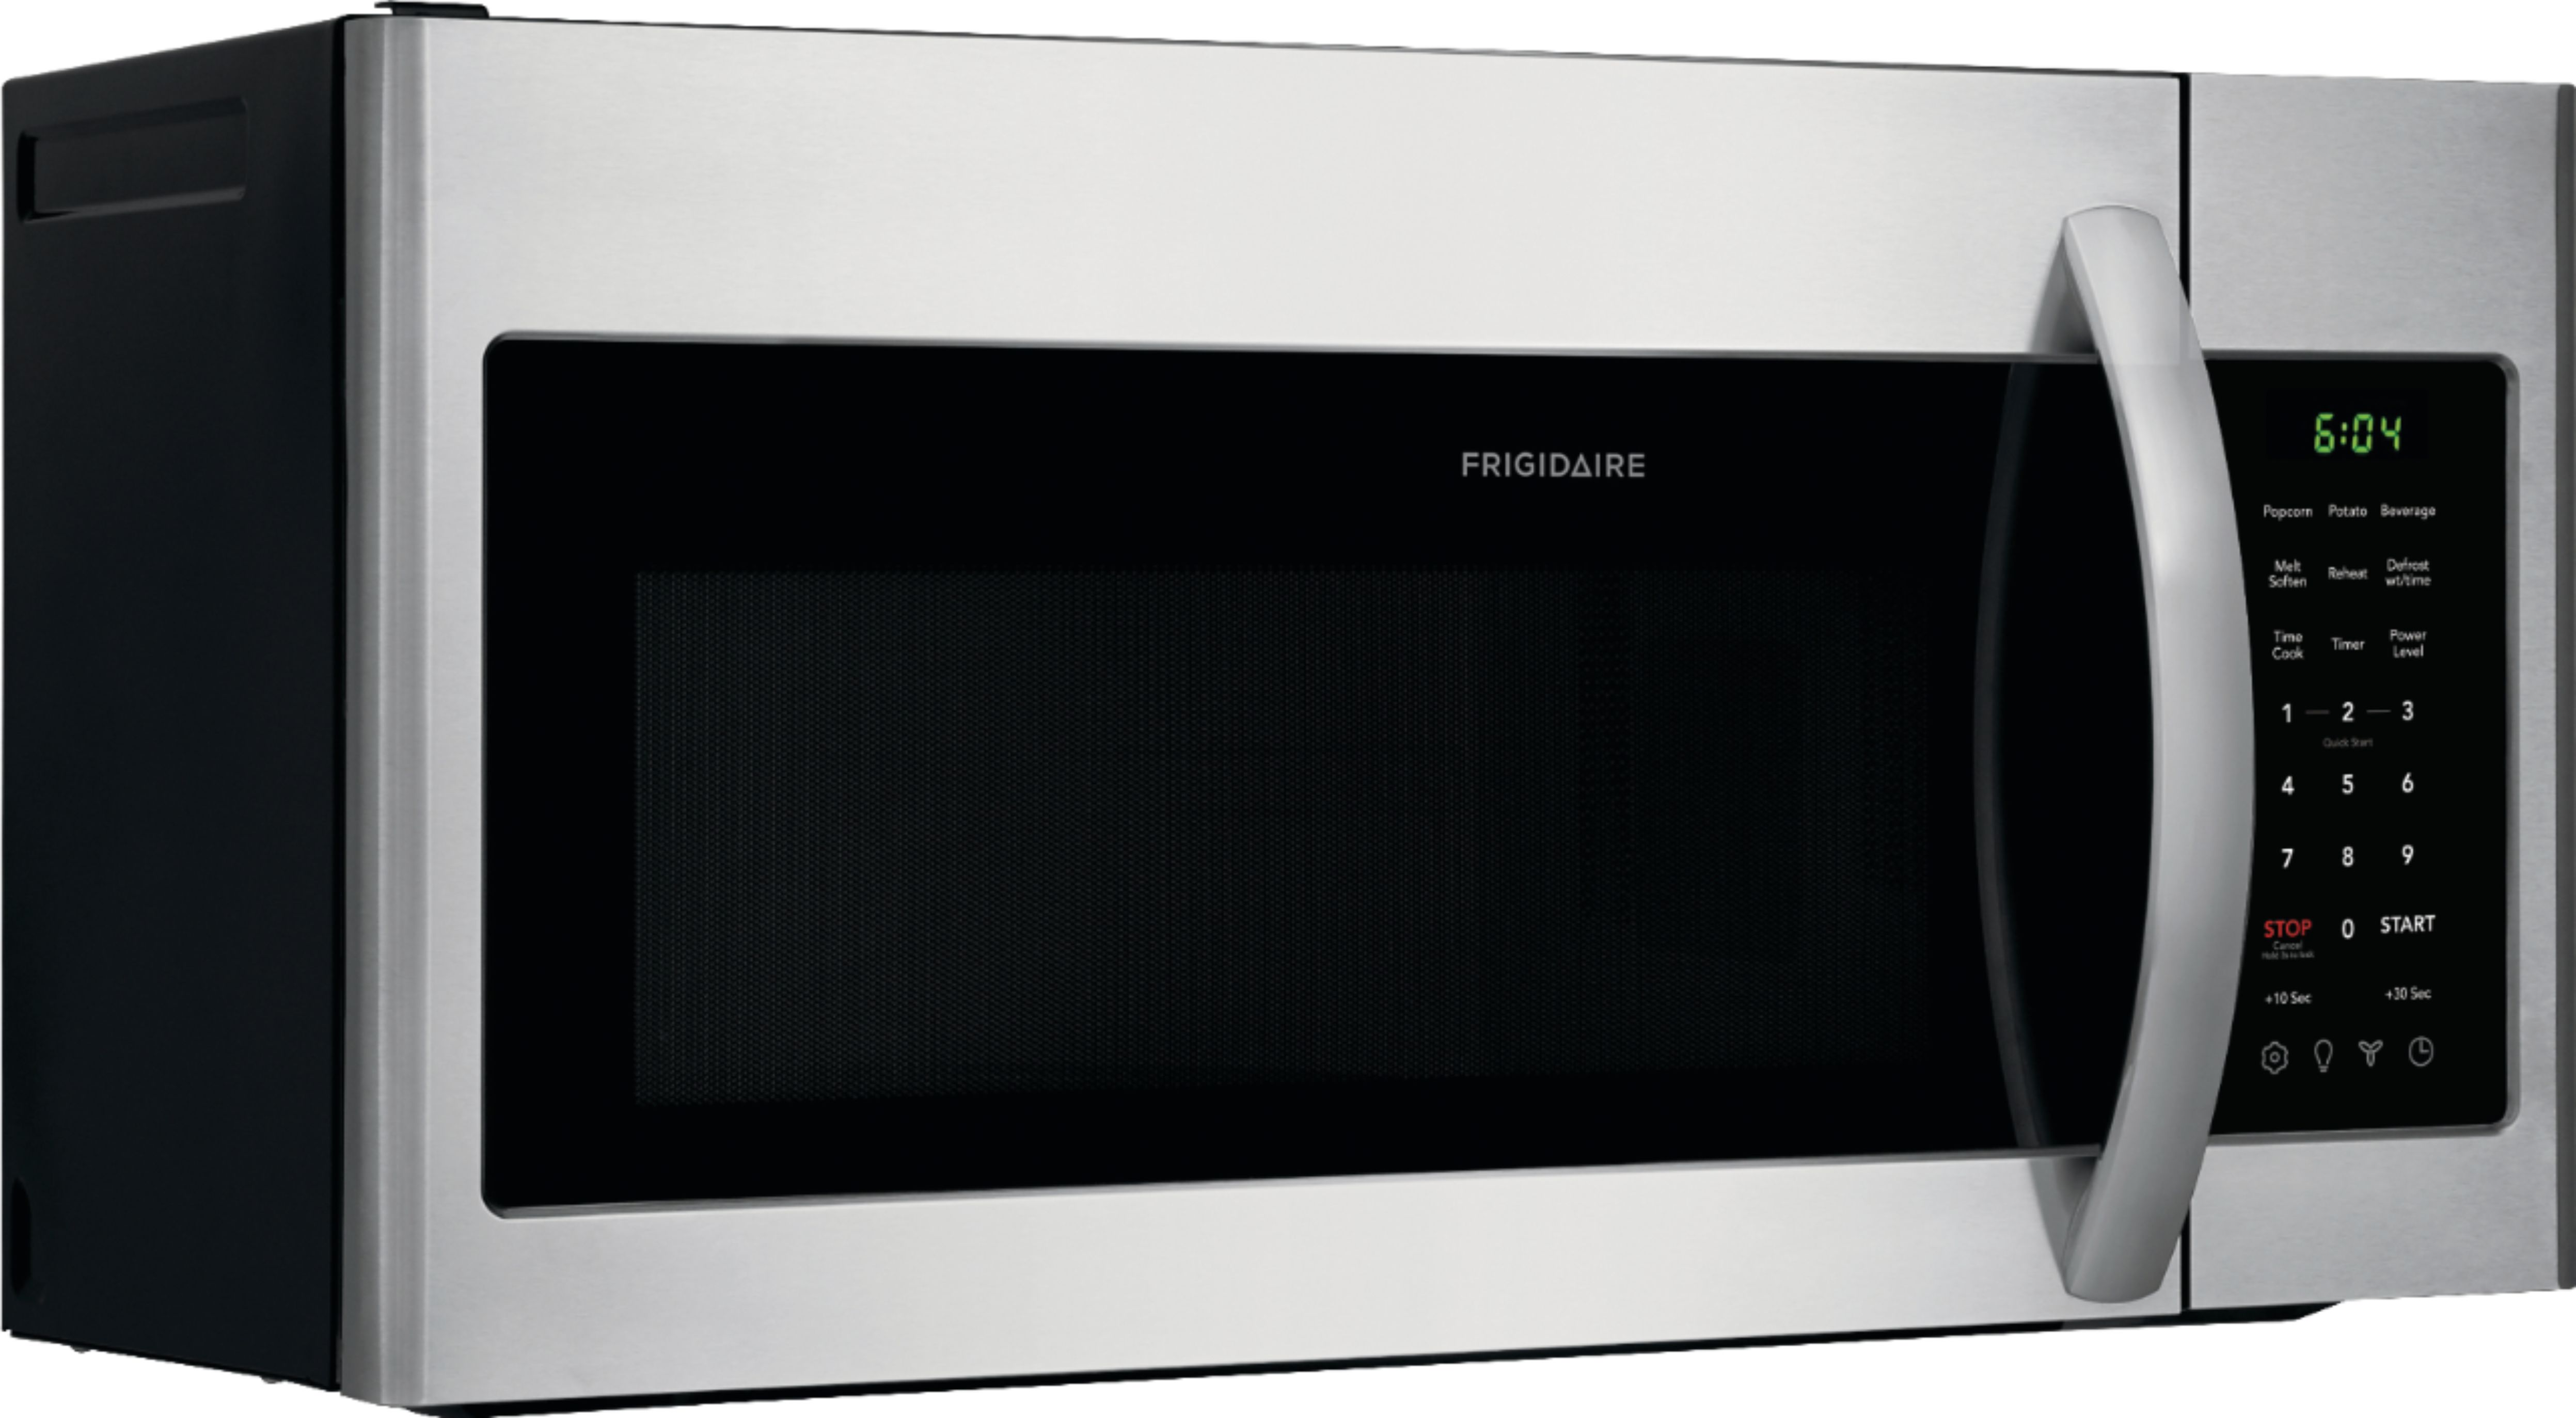 Angle View: Frigidaire - 1.8 Cu. Ft. Over-the-Range Microwave - Black stainless steel